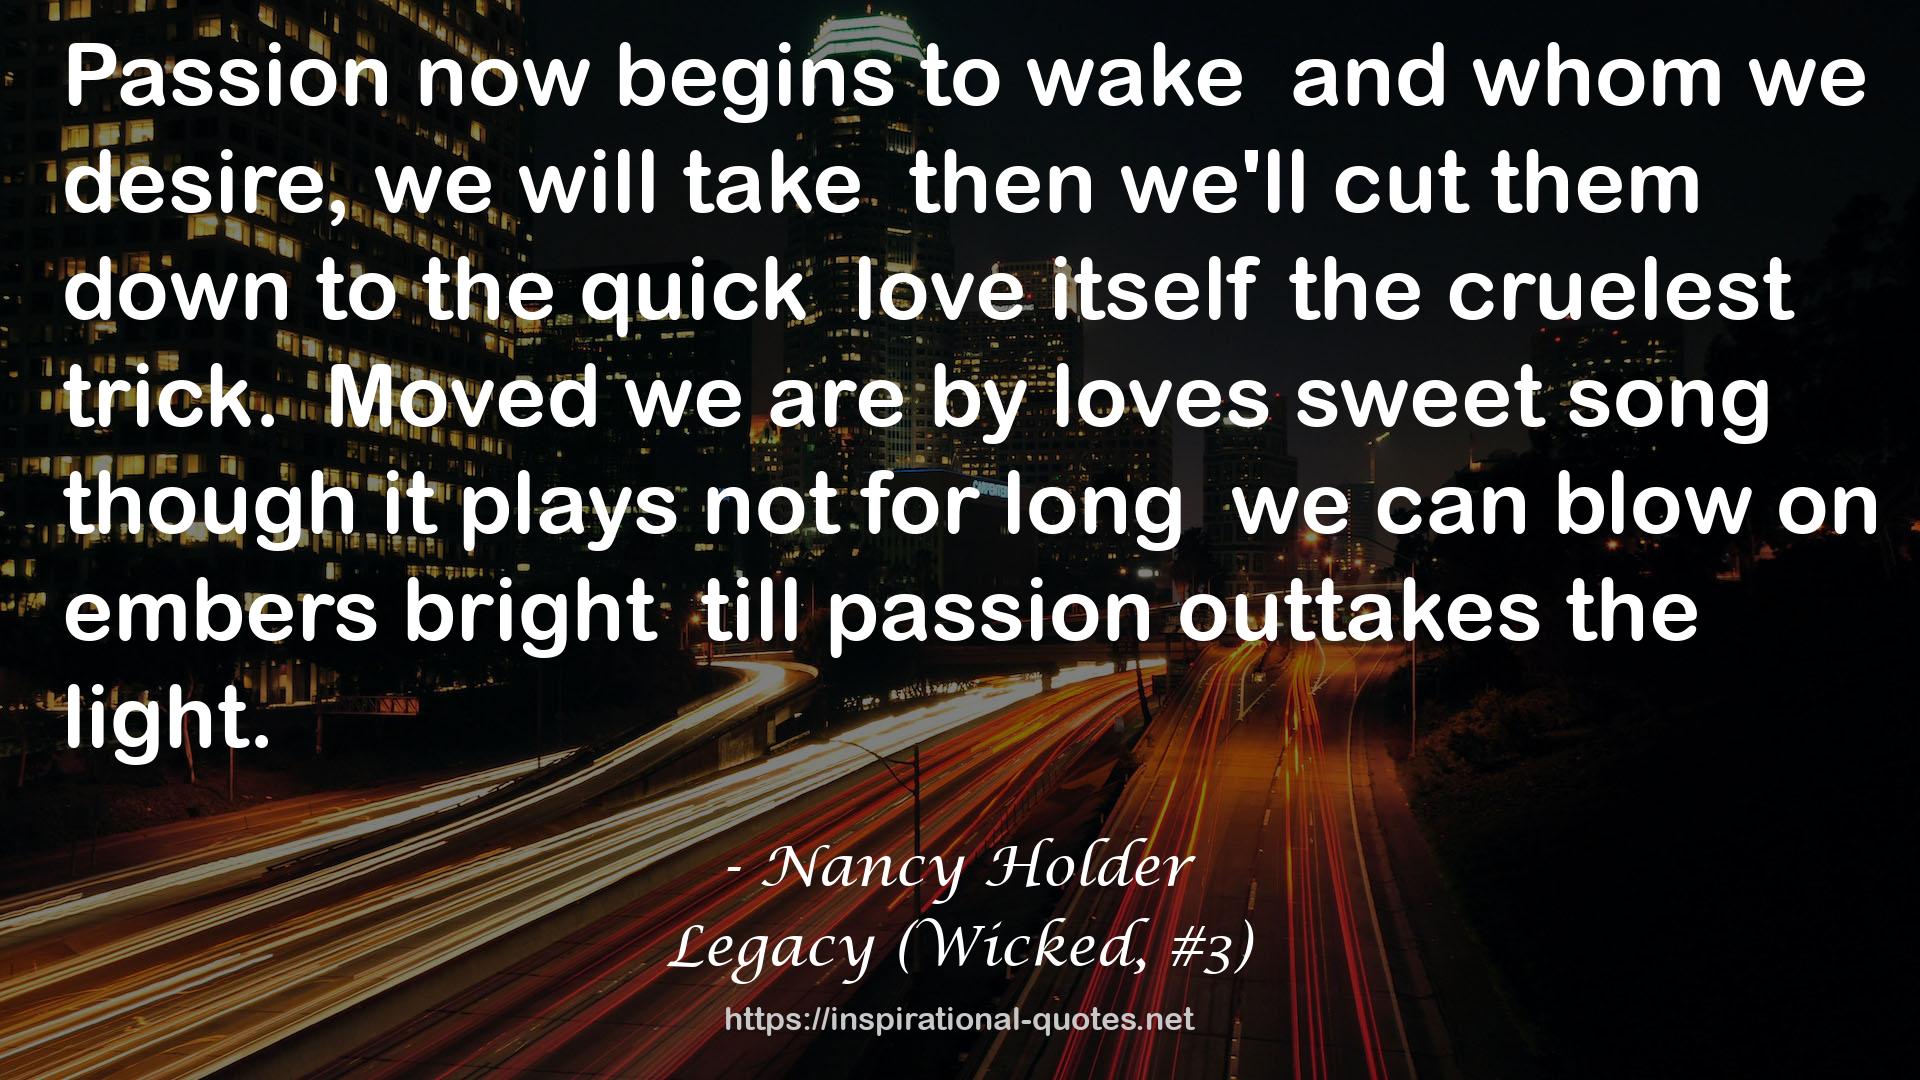 Legacy (Wicked, #3) QUOTES